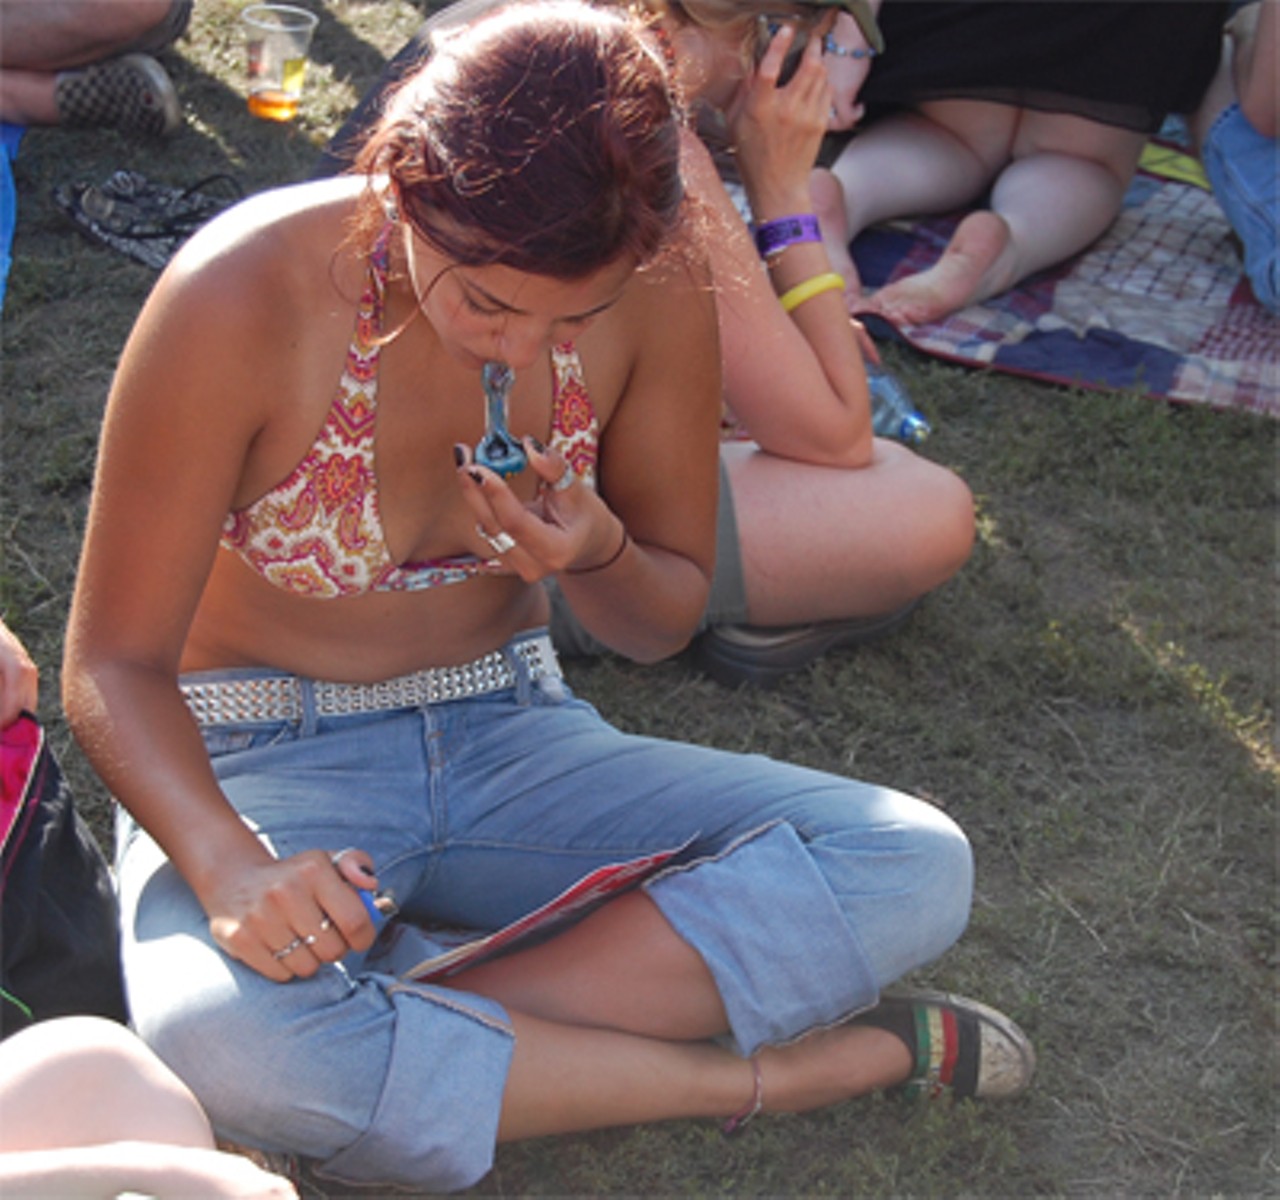 A rare fashion accessory, pot smoking is none the less a staple of most music festivals.